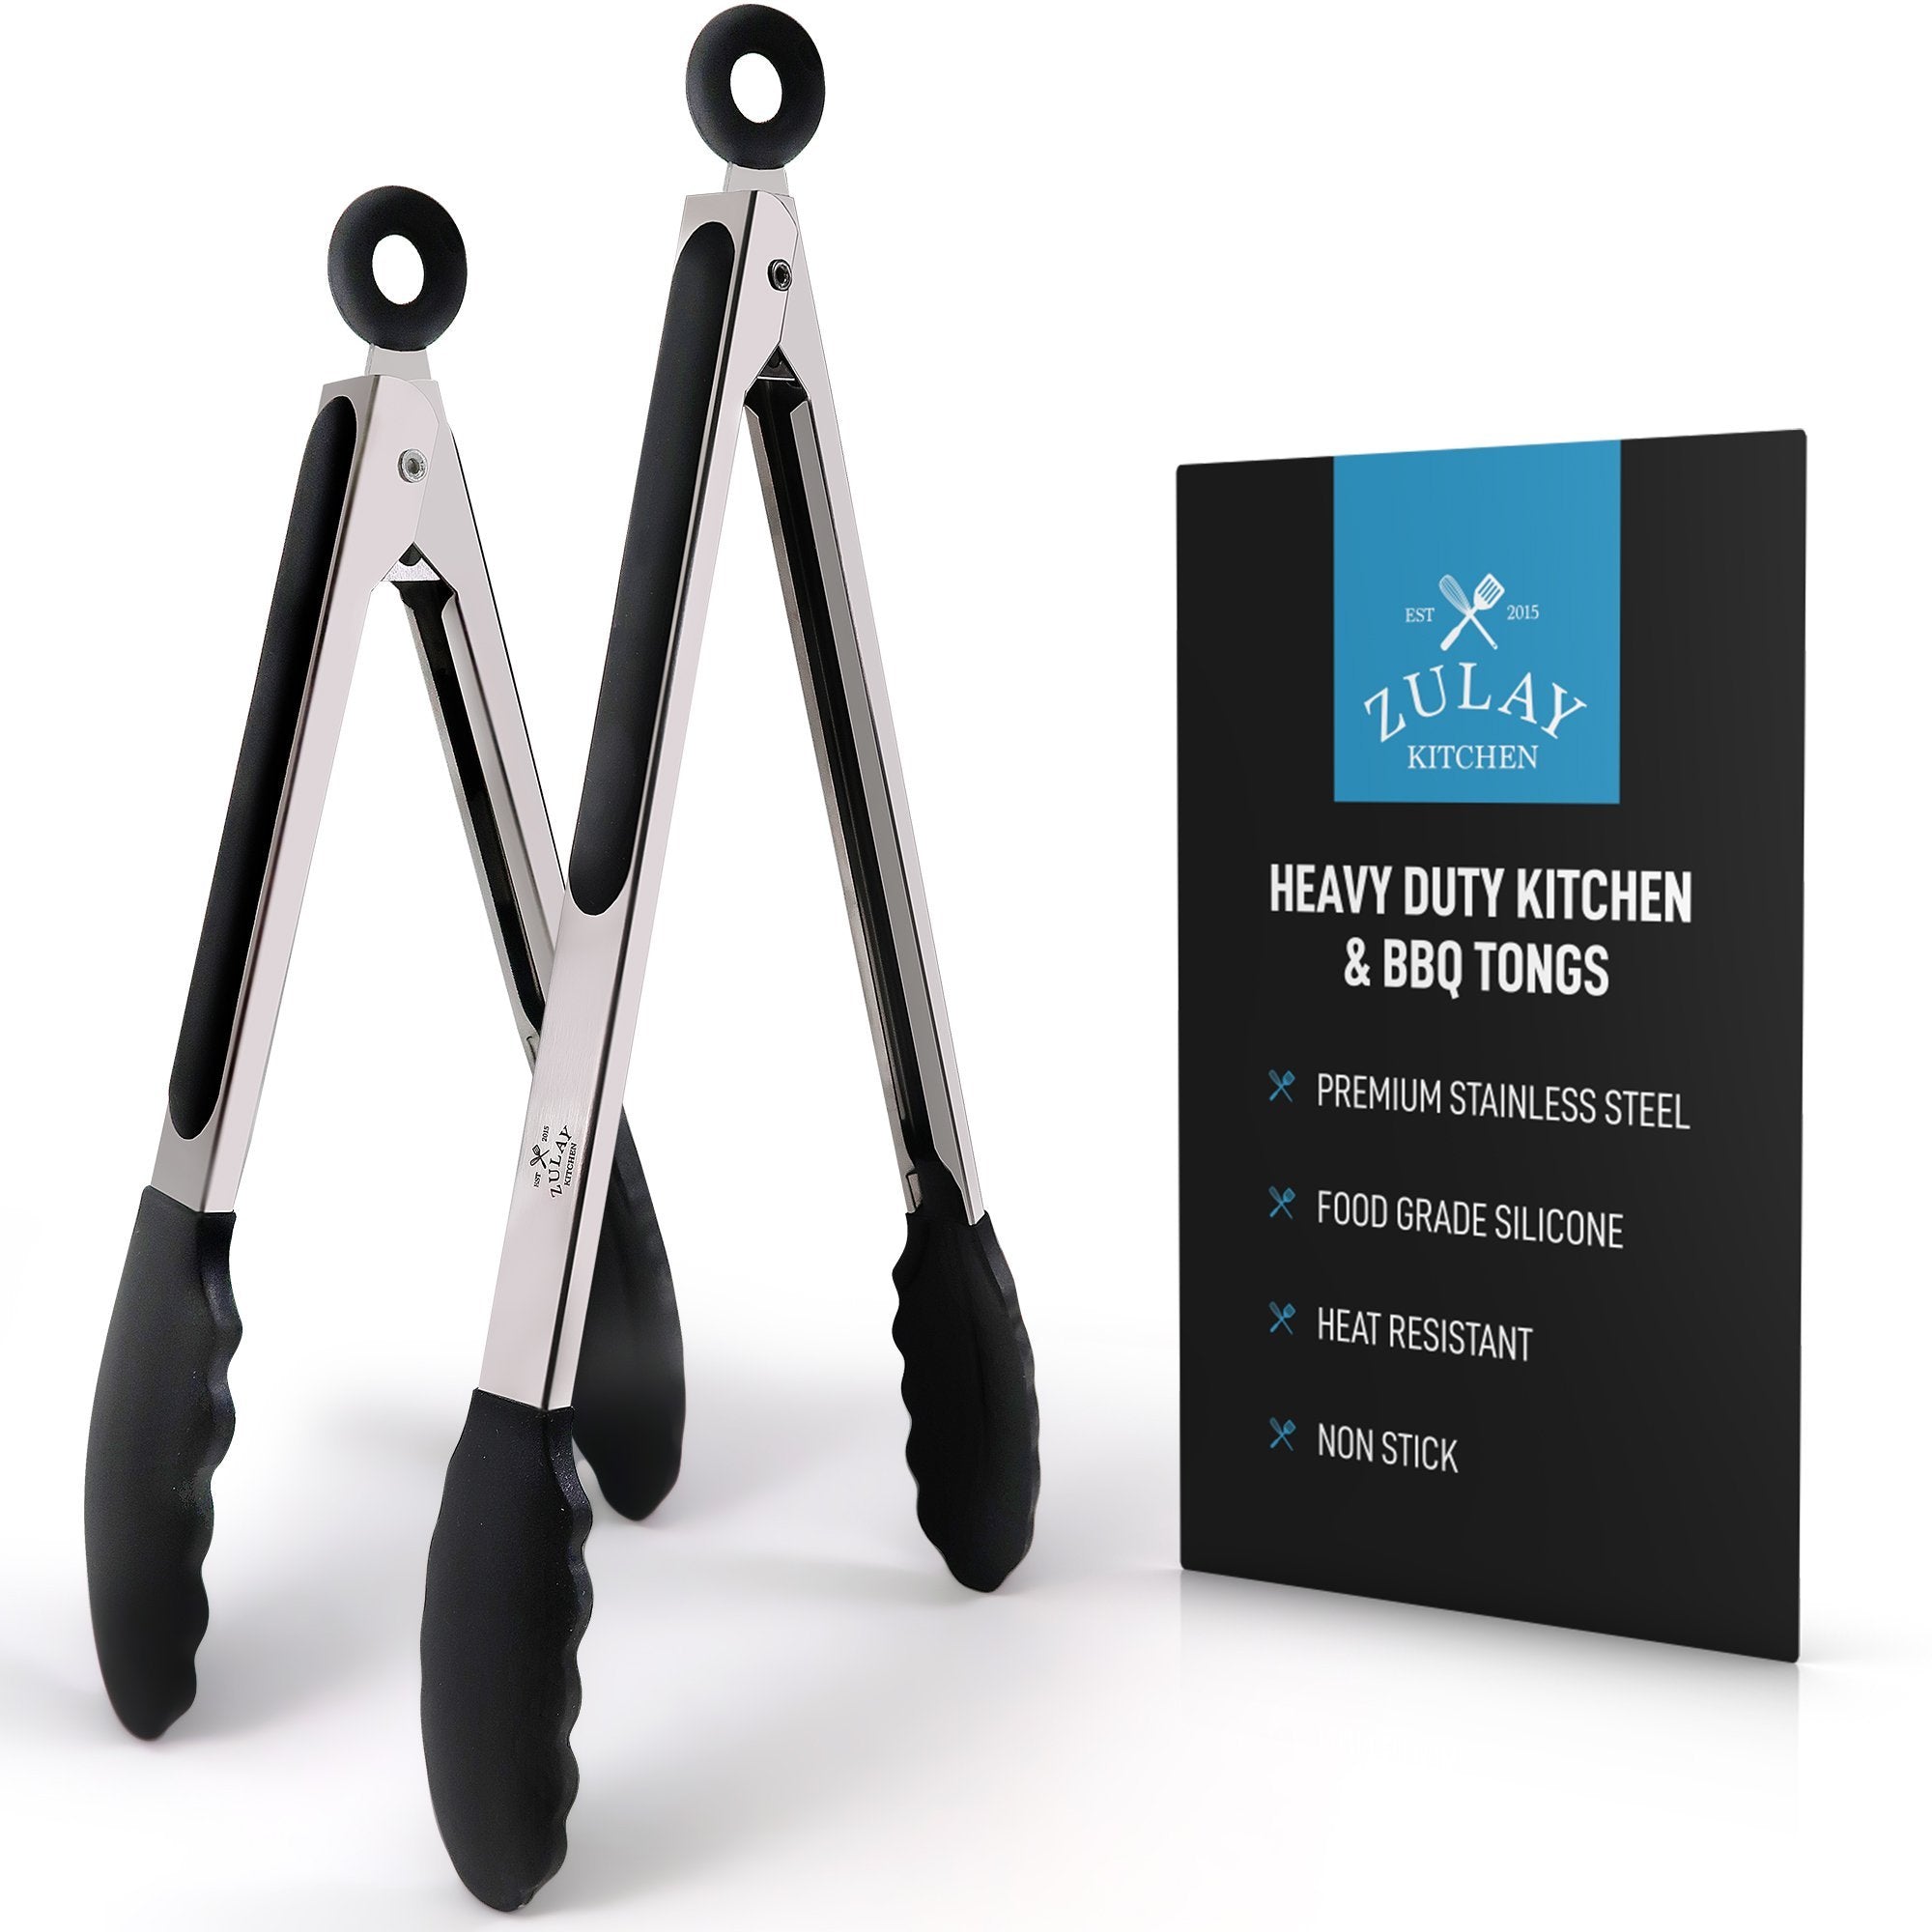 Poultry Shears Online  Zulay Kitchen - Save Big Today